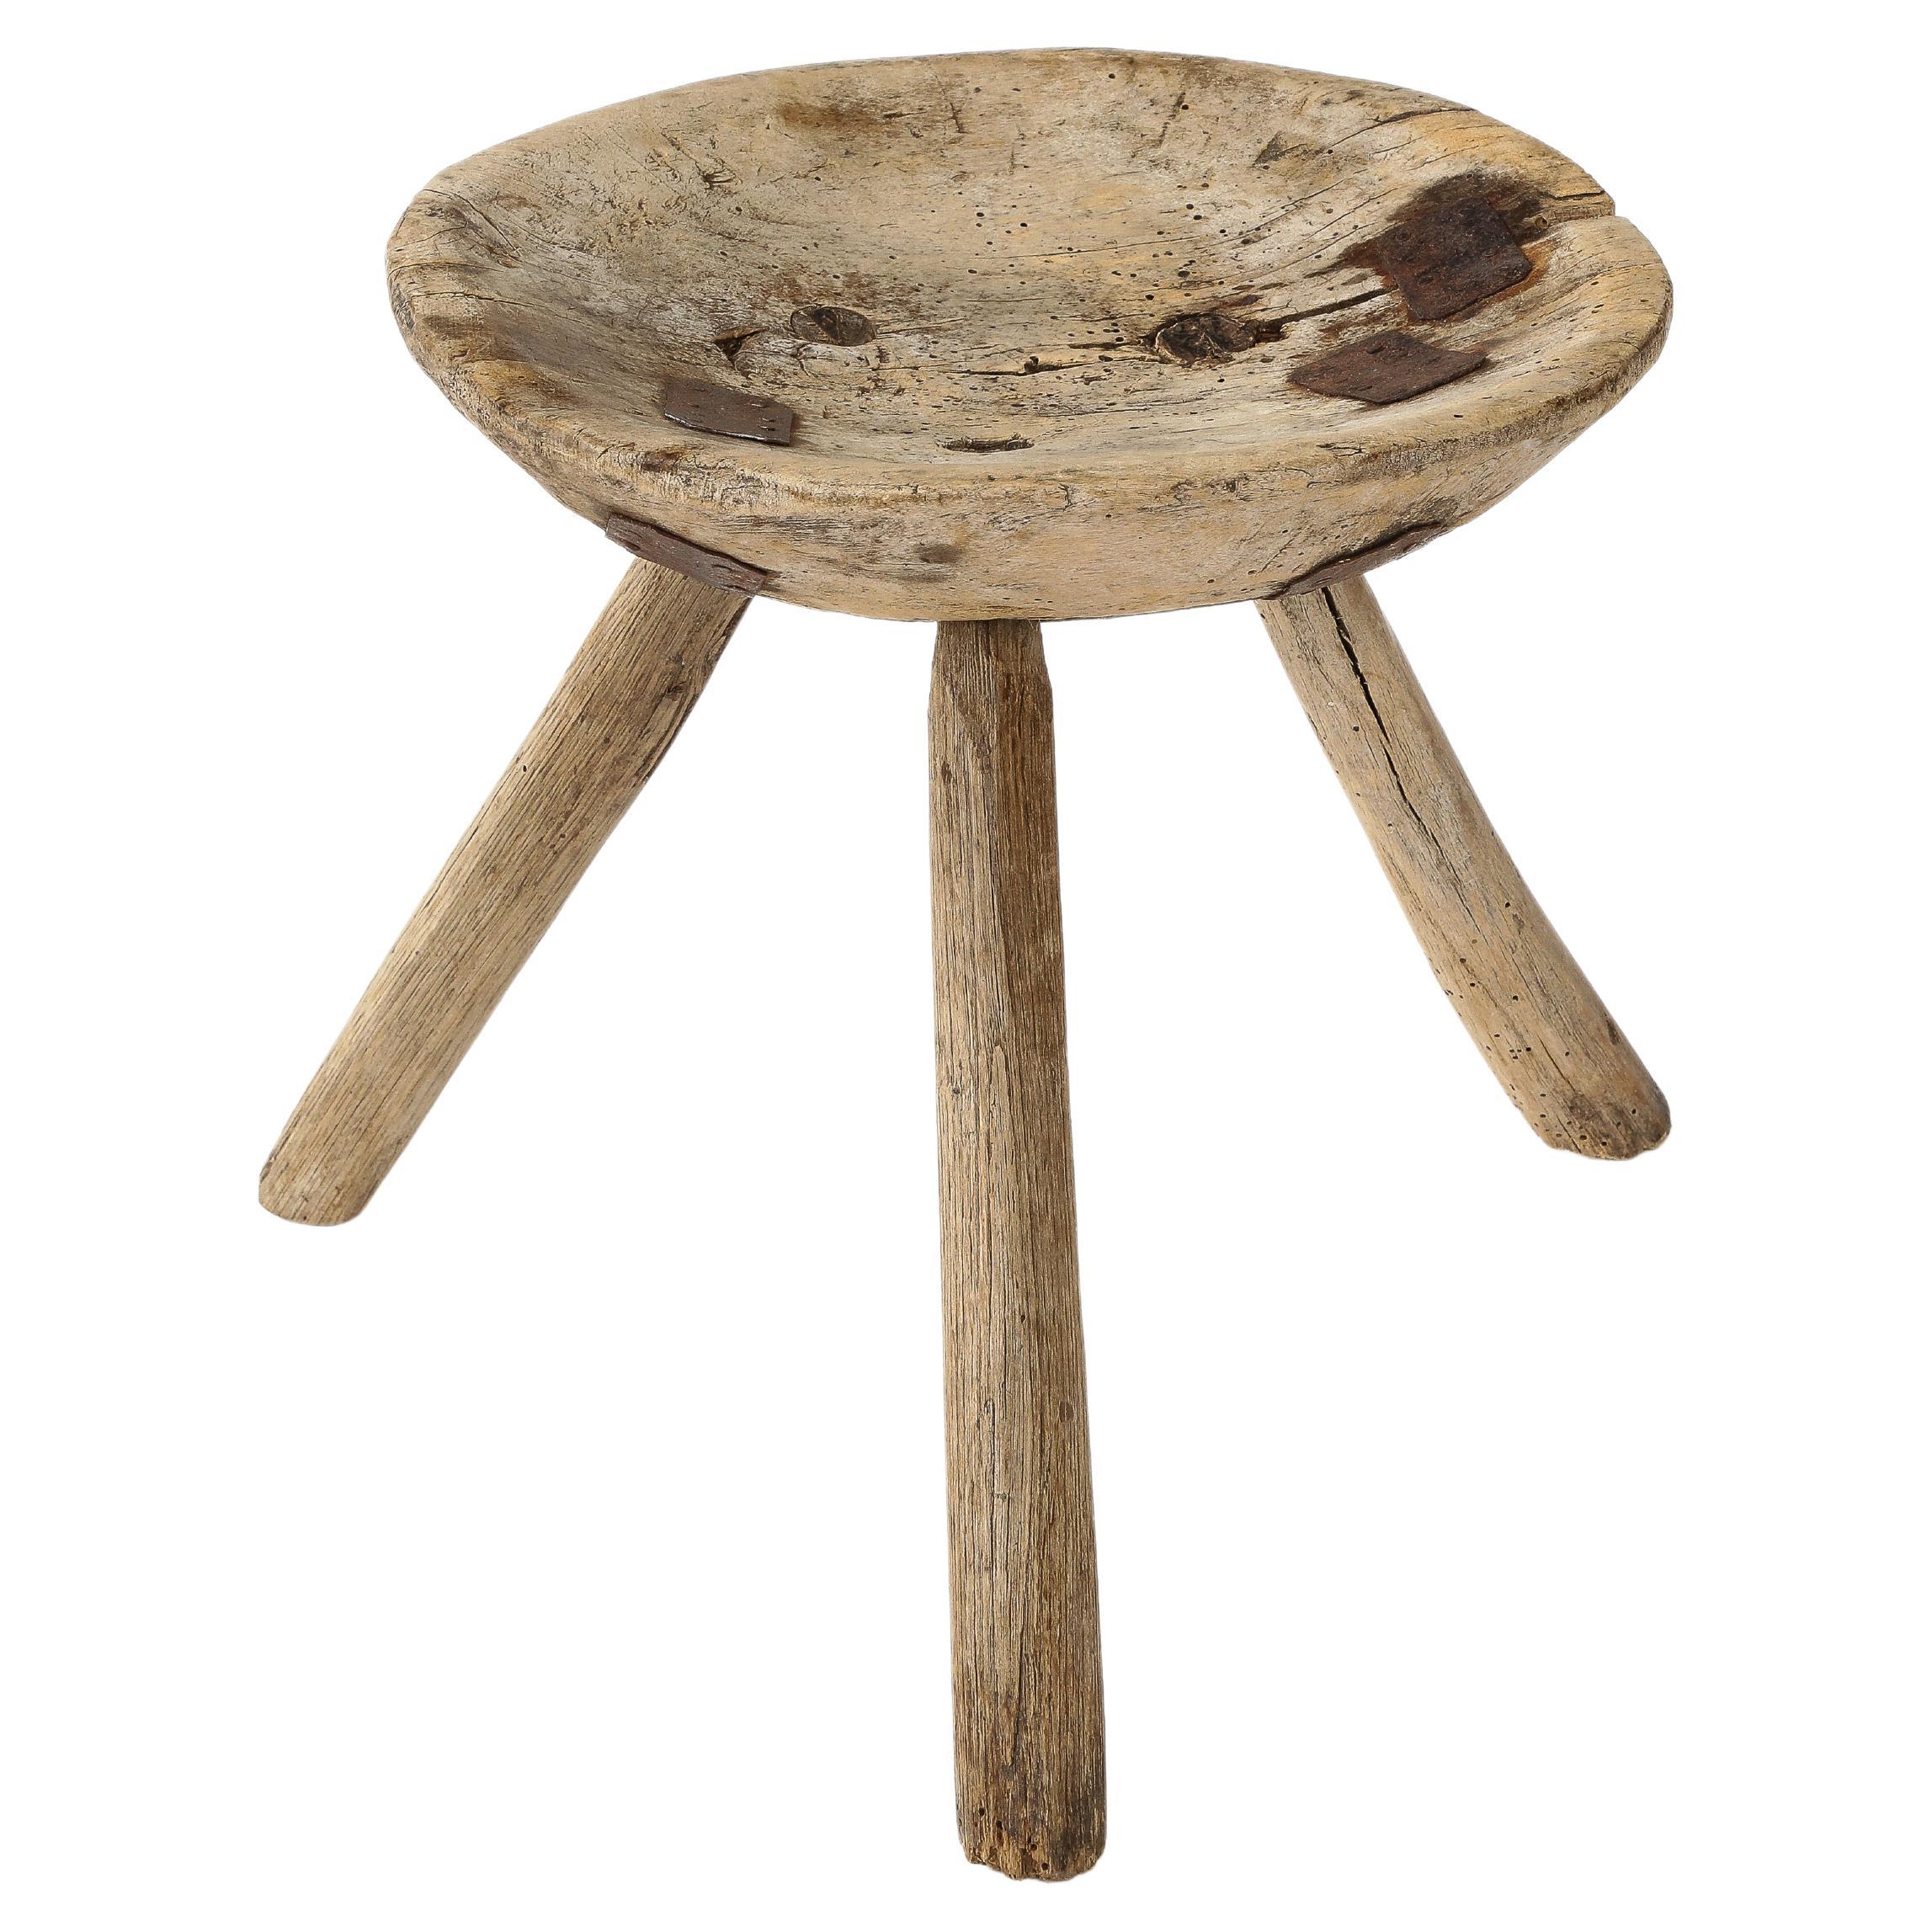 19th Century French Shepherds Stool with Handmade Metal Repairs For Sale